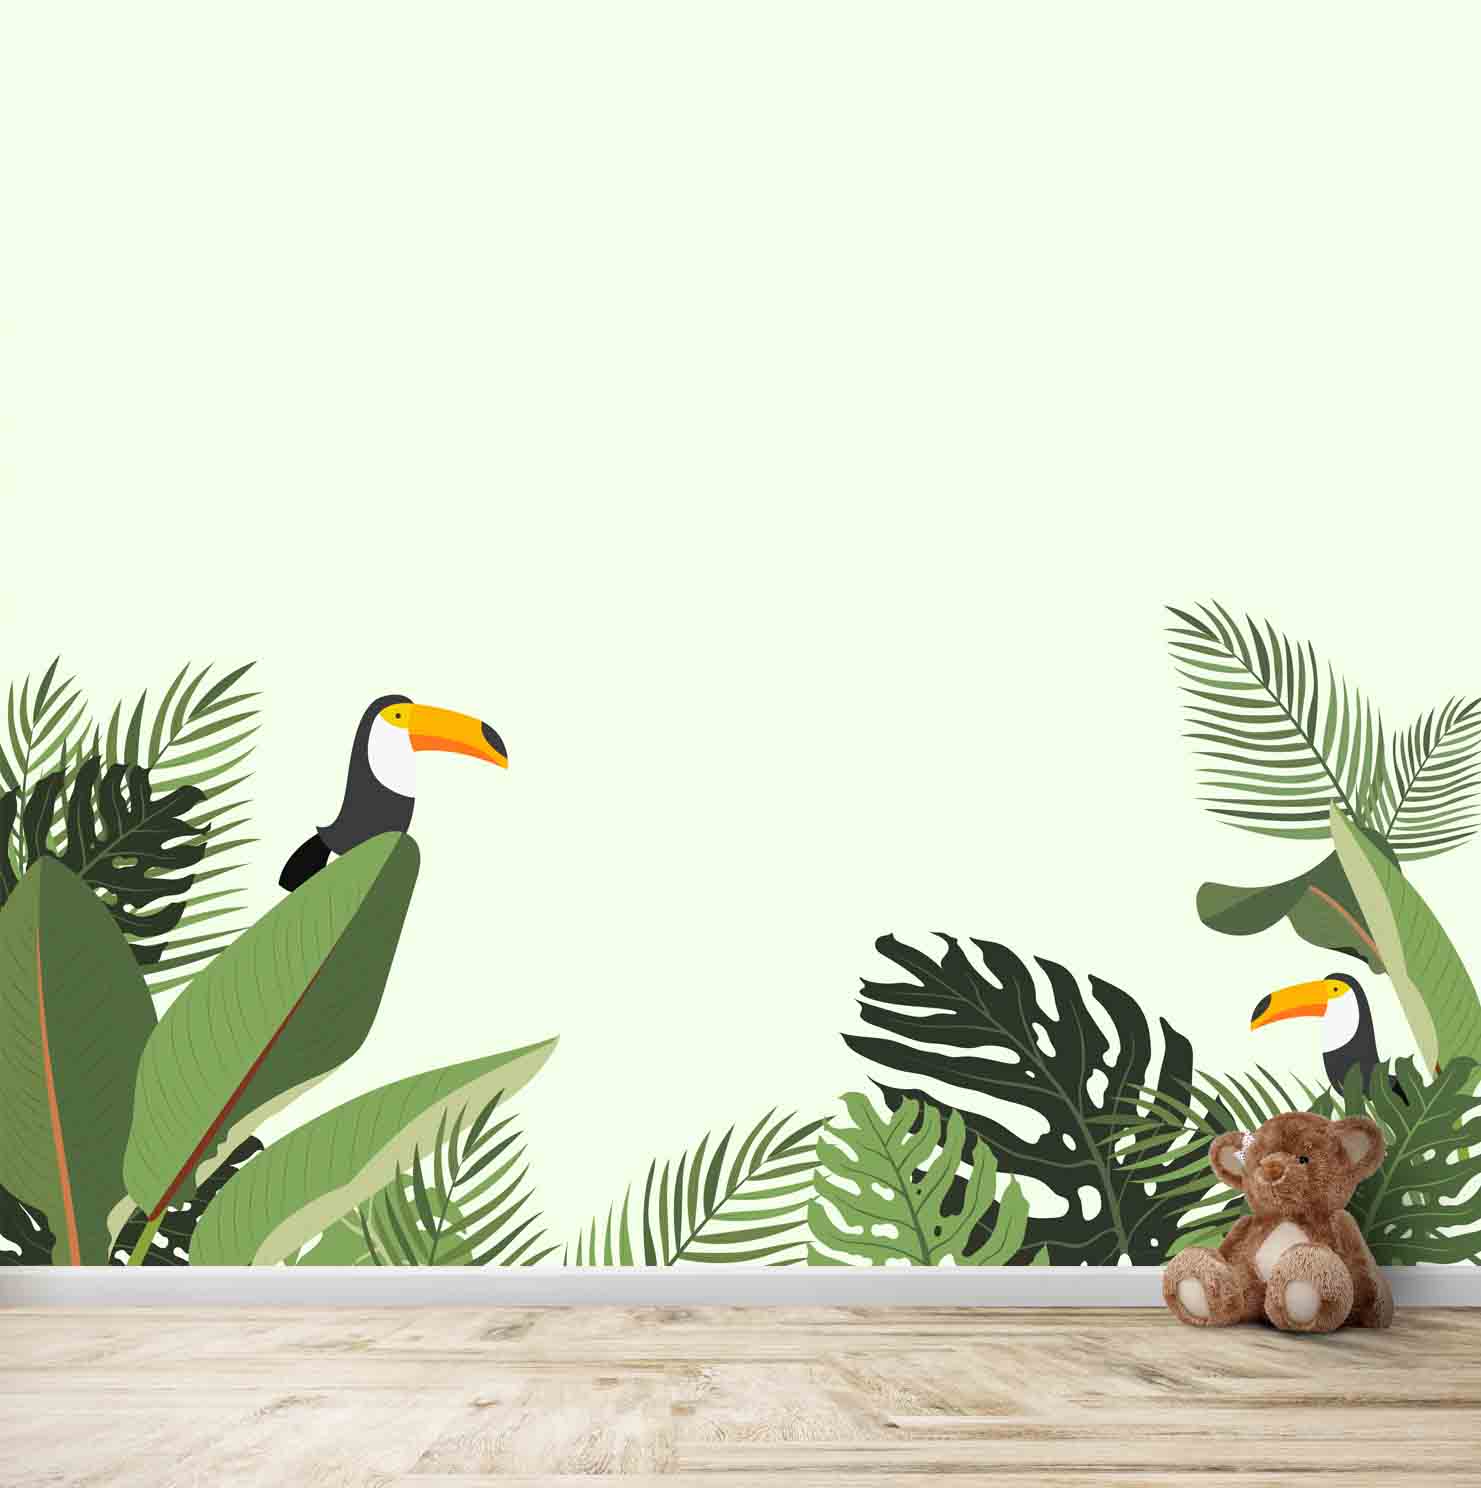 Tropical Leaves and Birds Themes Wallpaper for Walls